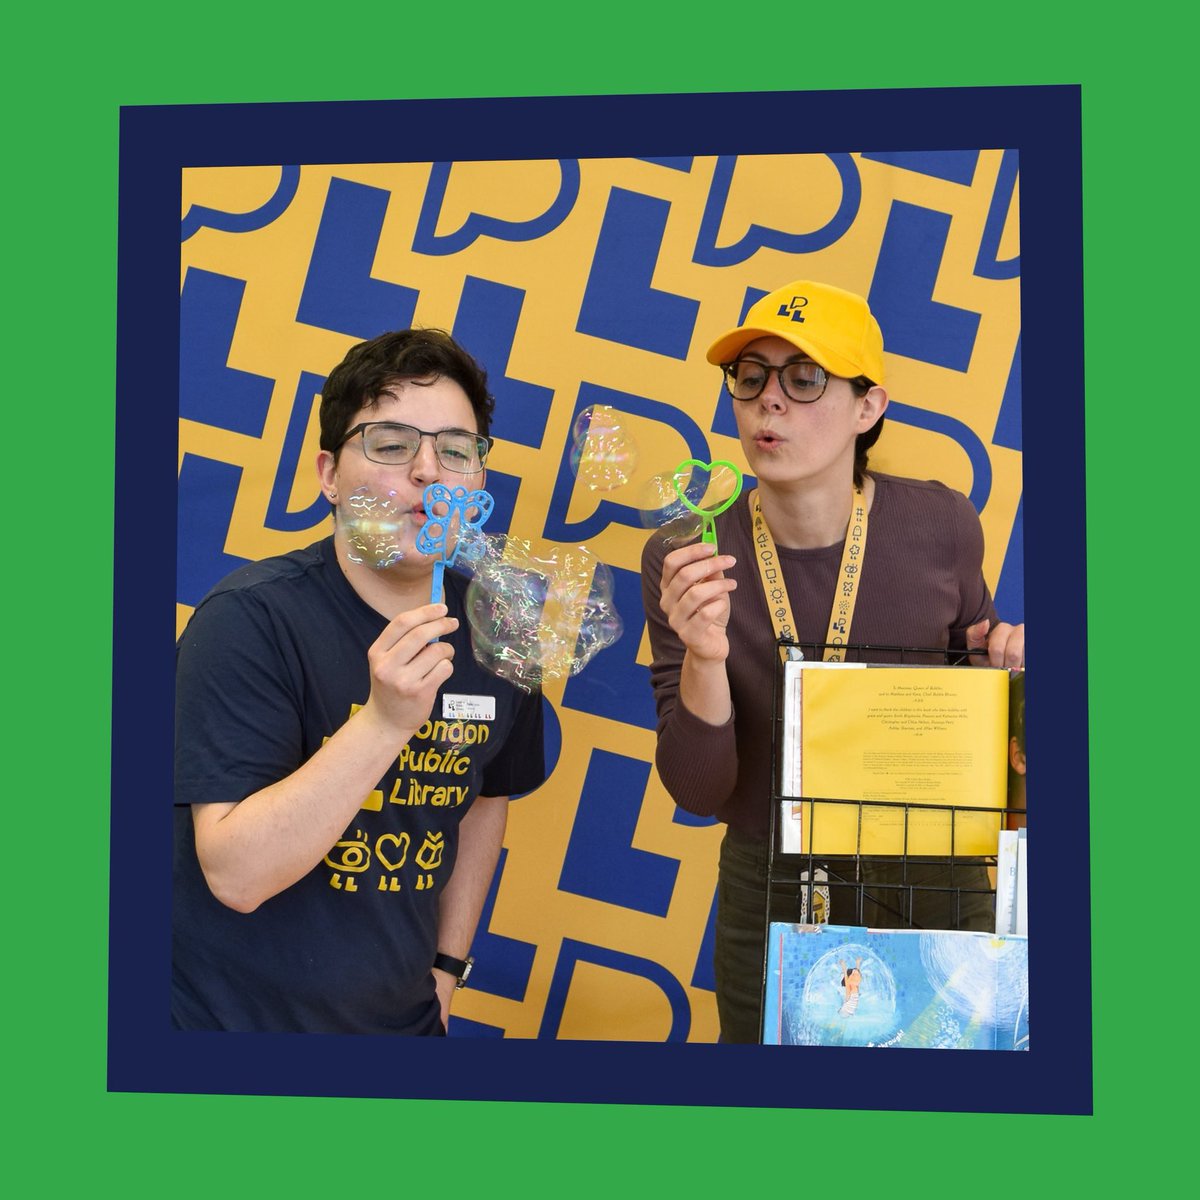 🔬🫧 We can’t wait for this year’s Science Rendezvous at Western University next Saturday, May 11! 🌟 Join our librarians for fun bubble experiments at our booth and a massive storytime on stage! Visit sciencerendezvous.uwo.ca for all the event details 🧪